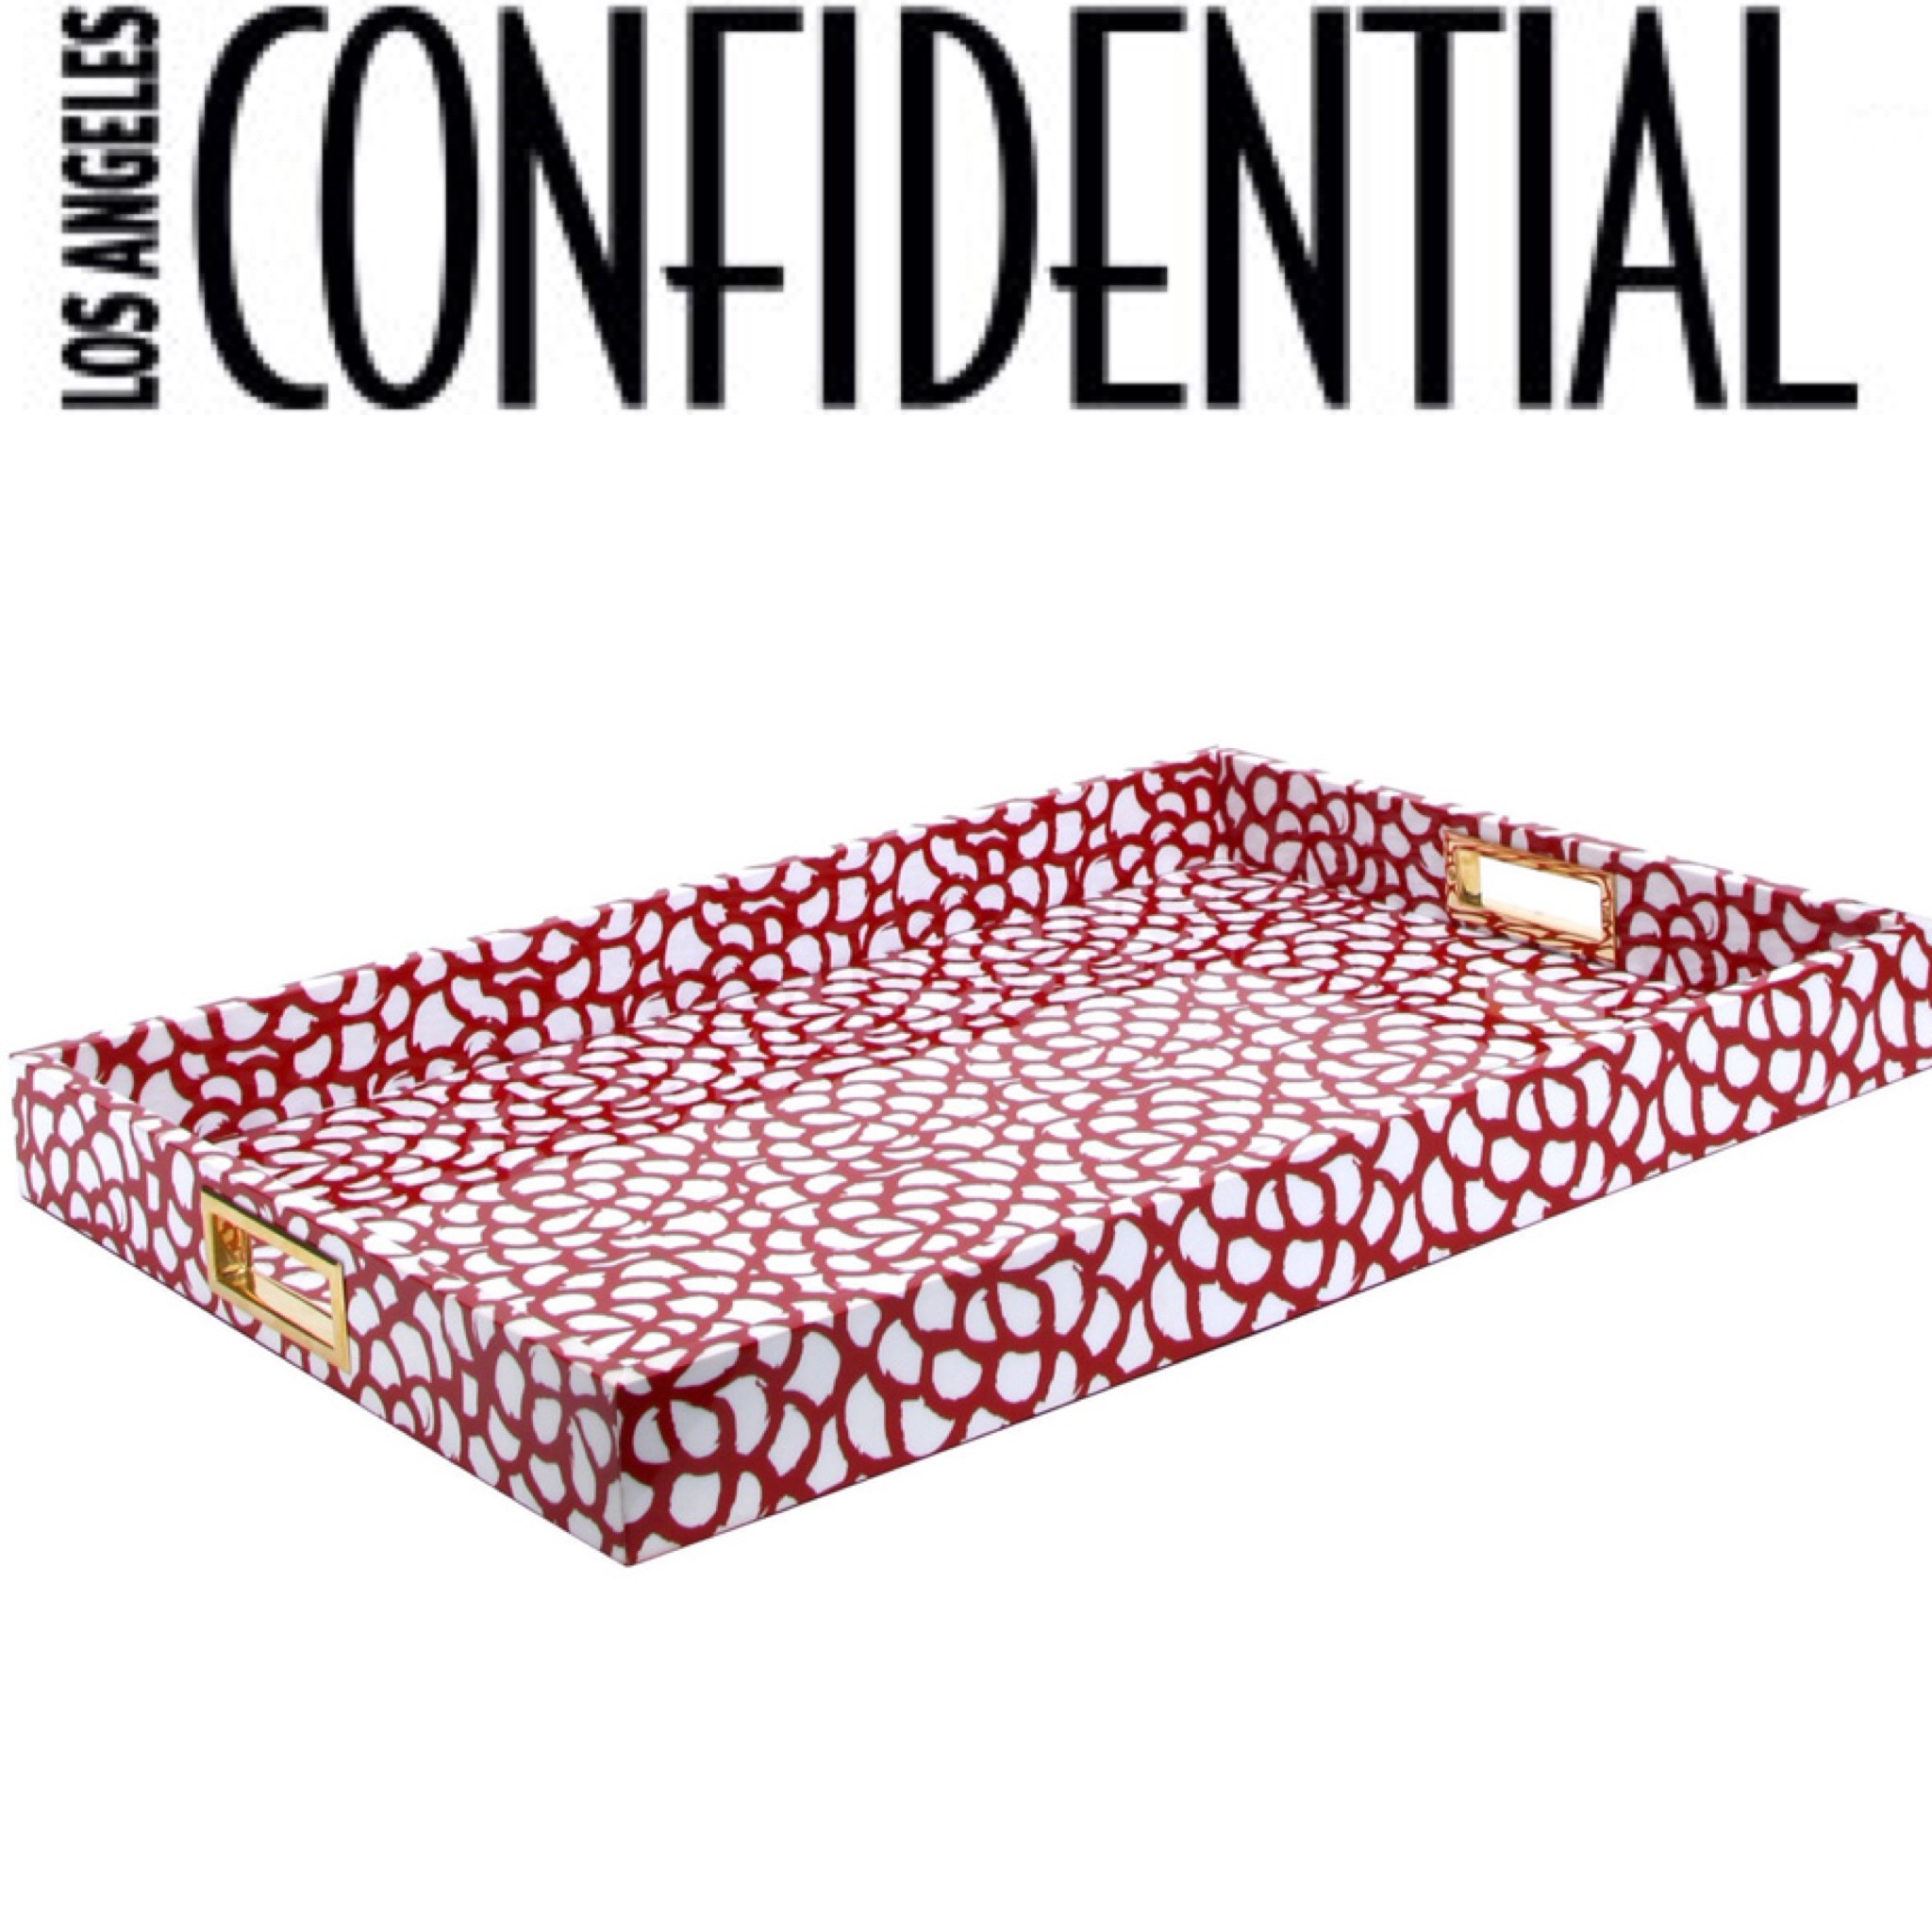  https://la-confidential-magazine.com/chic-catch-all-trays-for-your-home 